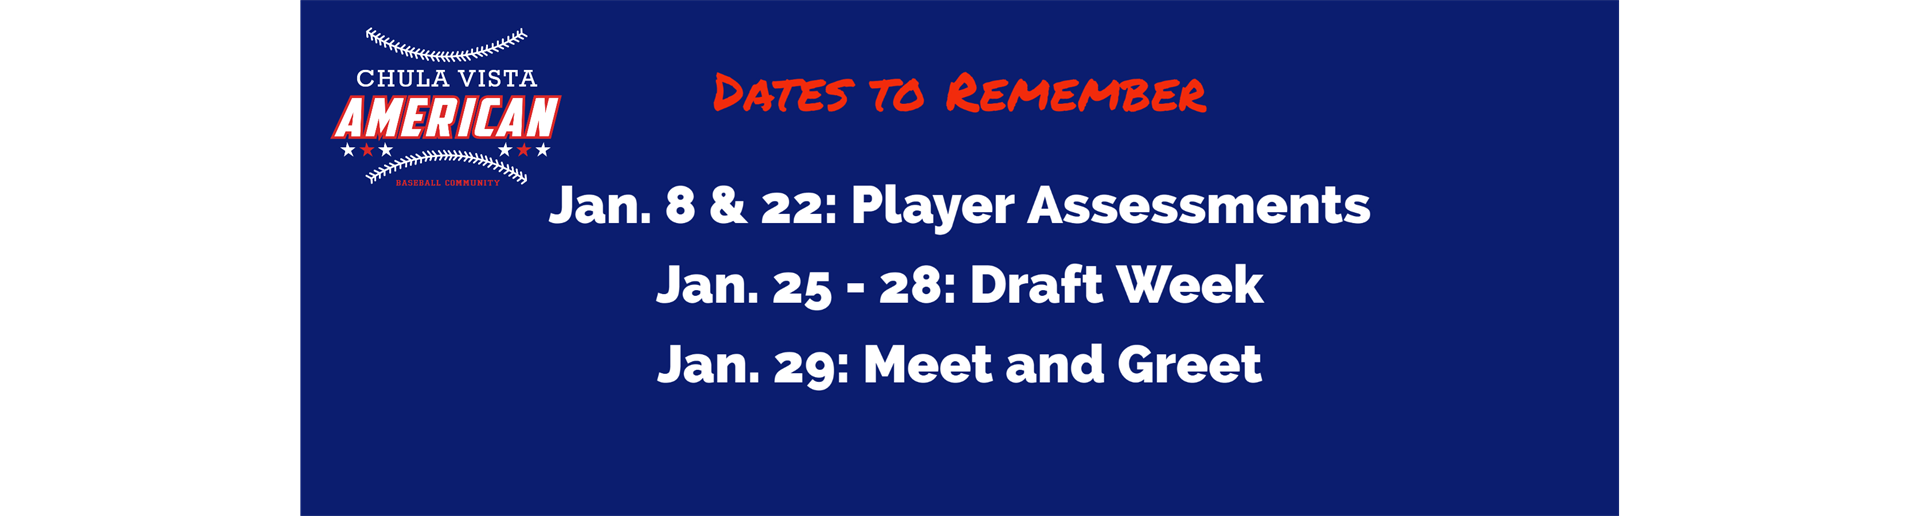 Dates to remember